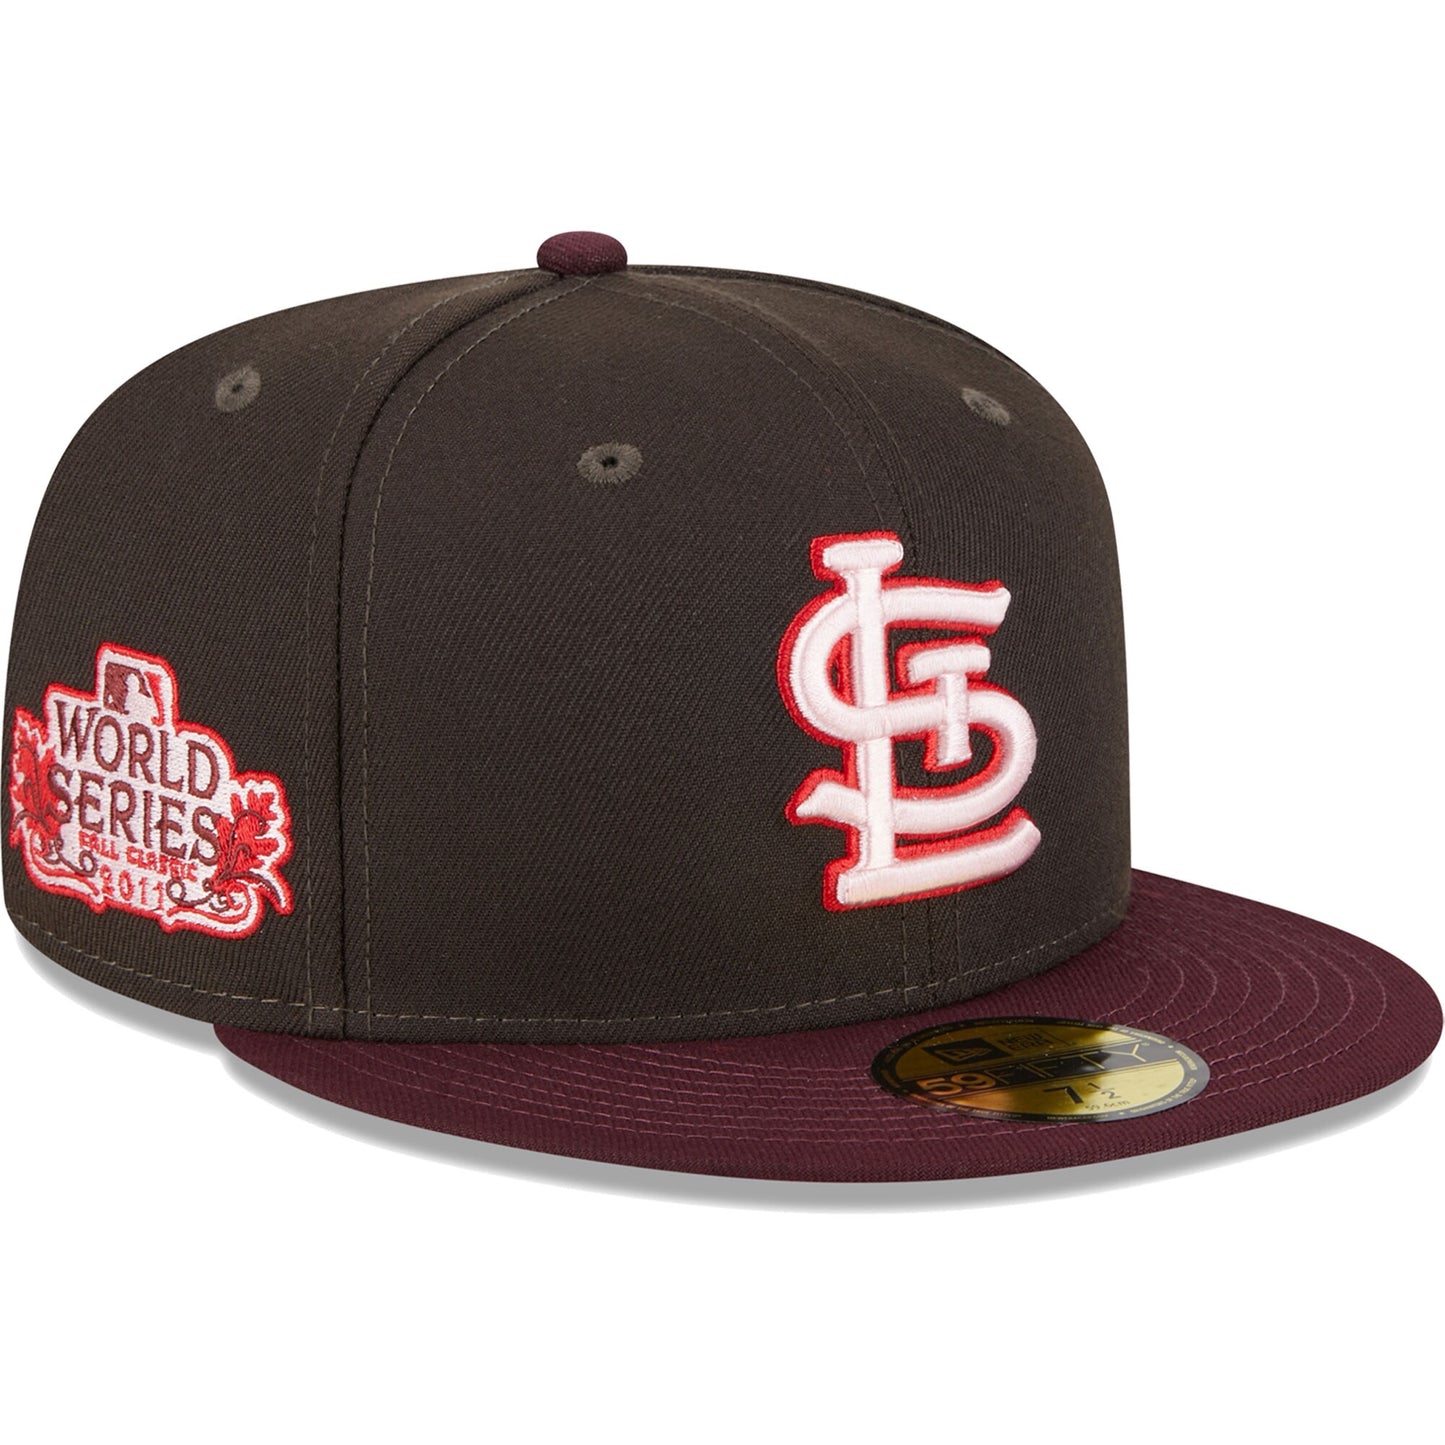 St. Louis Cardinals New Era Chocolate Strawberry 59FIFTY Fitted Hat - Brown/Maroon